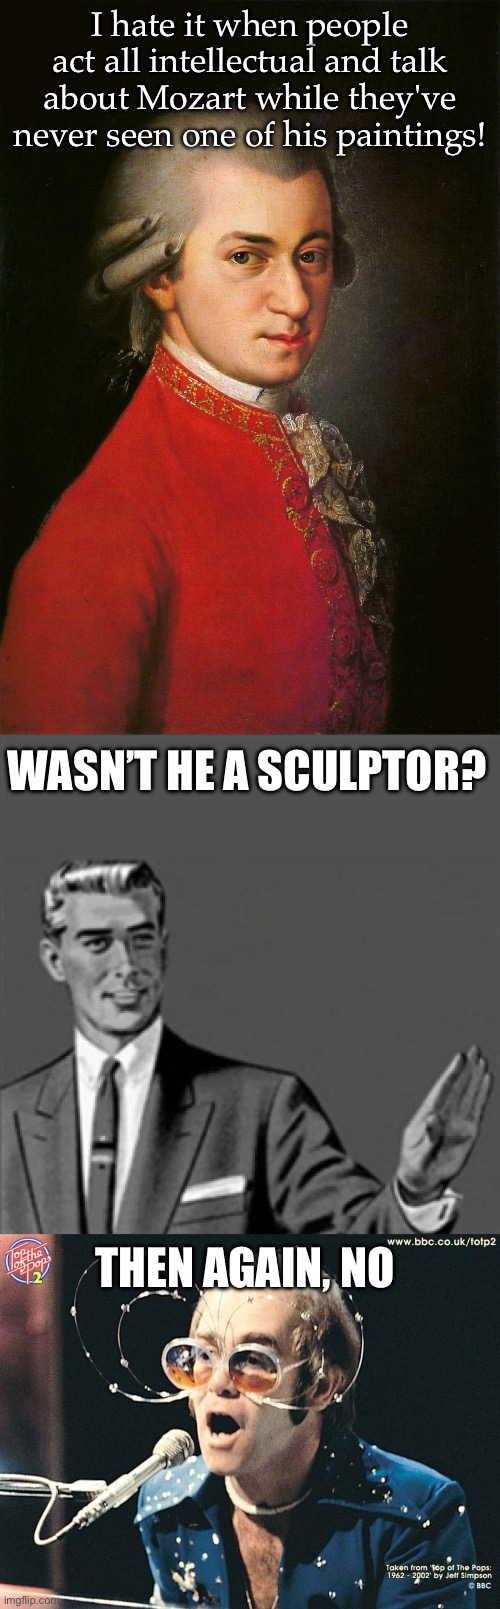 Mozart’s paintings | I hate it when people act all intellectual and talk about Mozart while they've never seen one of his paintings! WASN’T HE A SCULPTOR? THEN AGAIN, NO | image tagged in mozart,correction guy,elton john,painting,sculpture | made w/ Imgflip meme maker